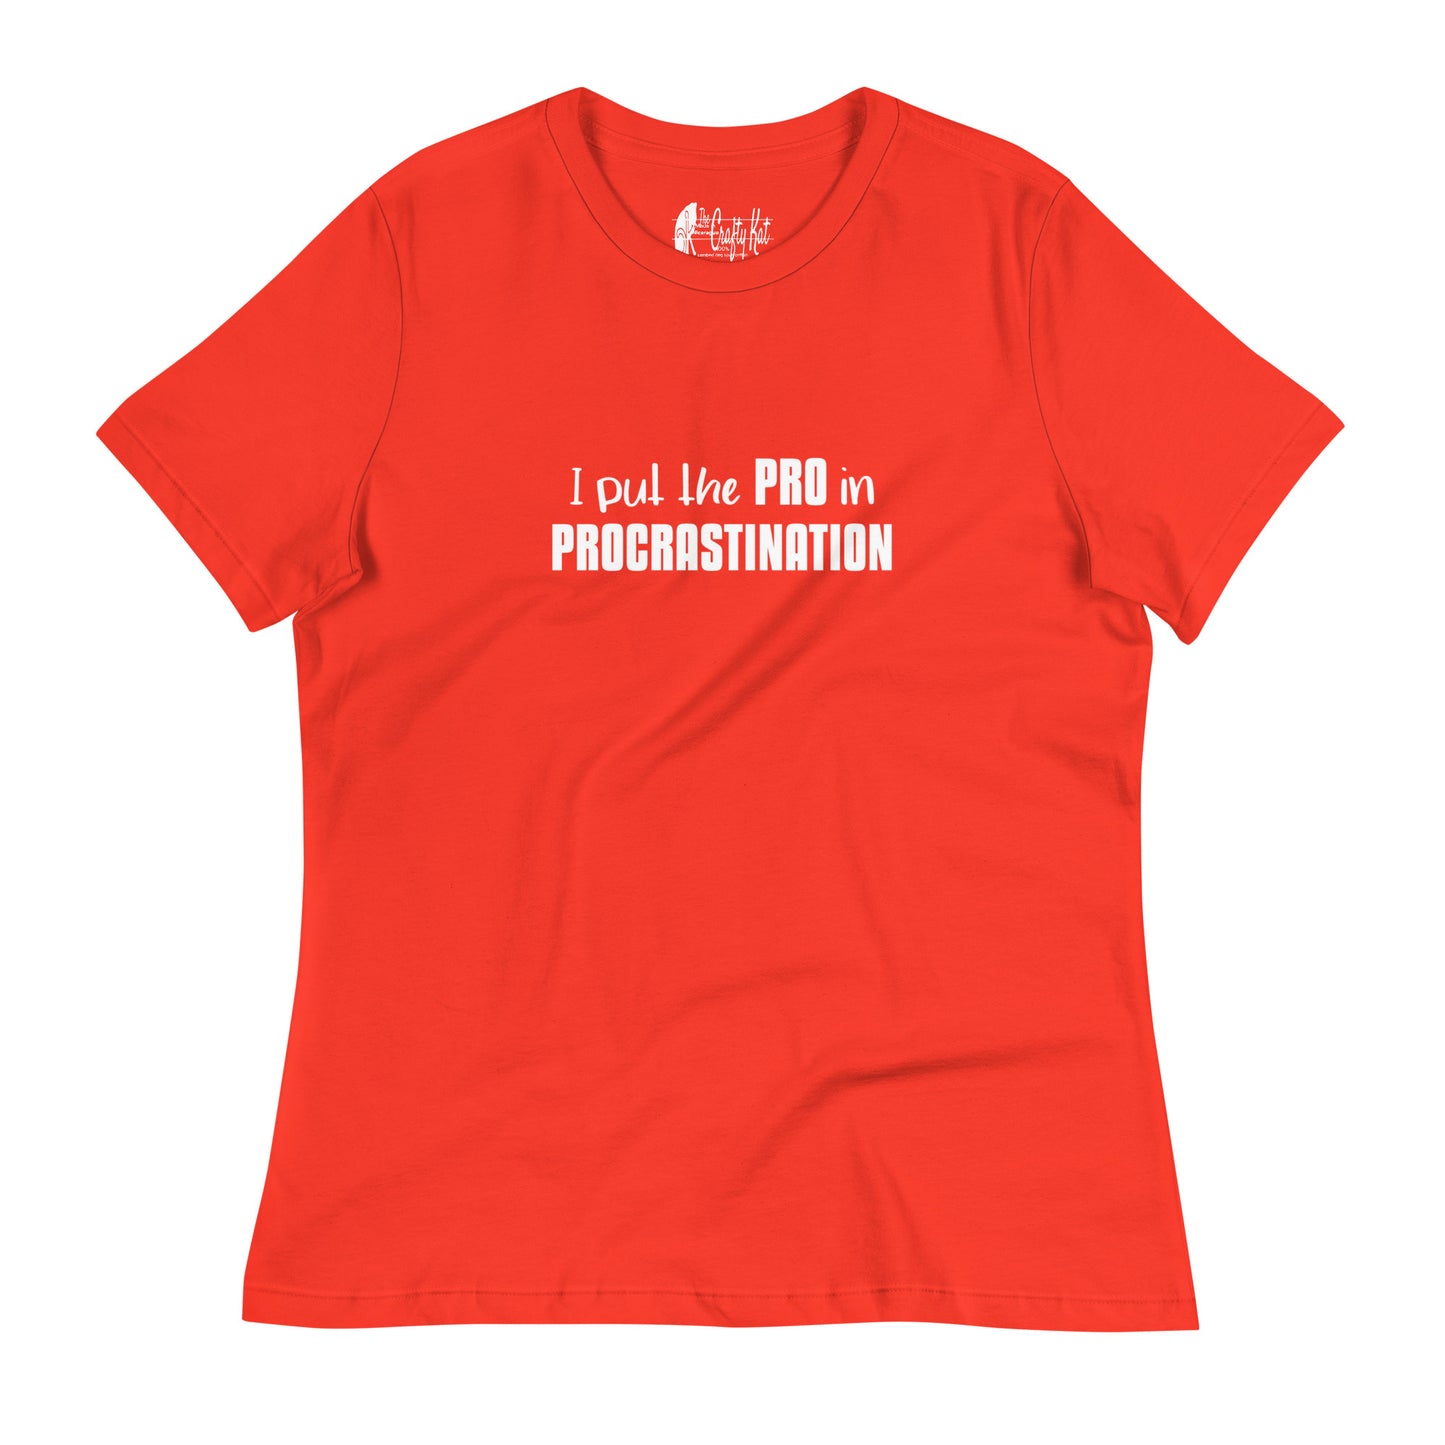 Poppy (bright red) women's relaxed t-shirt with text graphic: "I put the PRO in PROCRASTINATION"